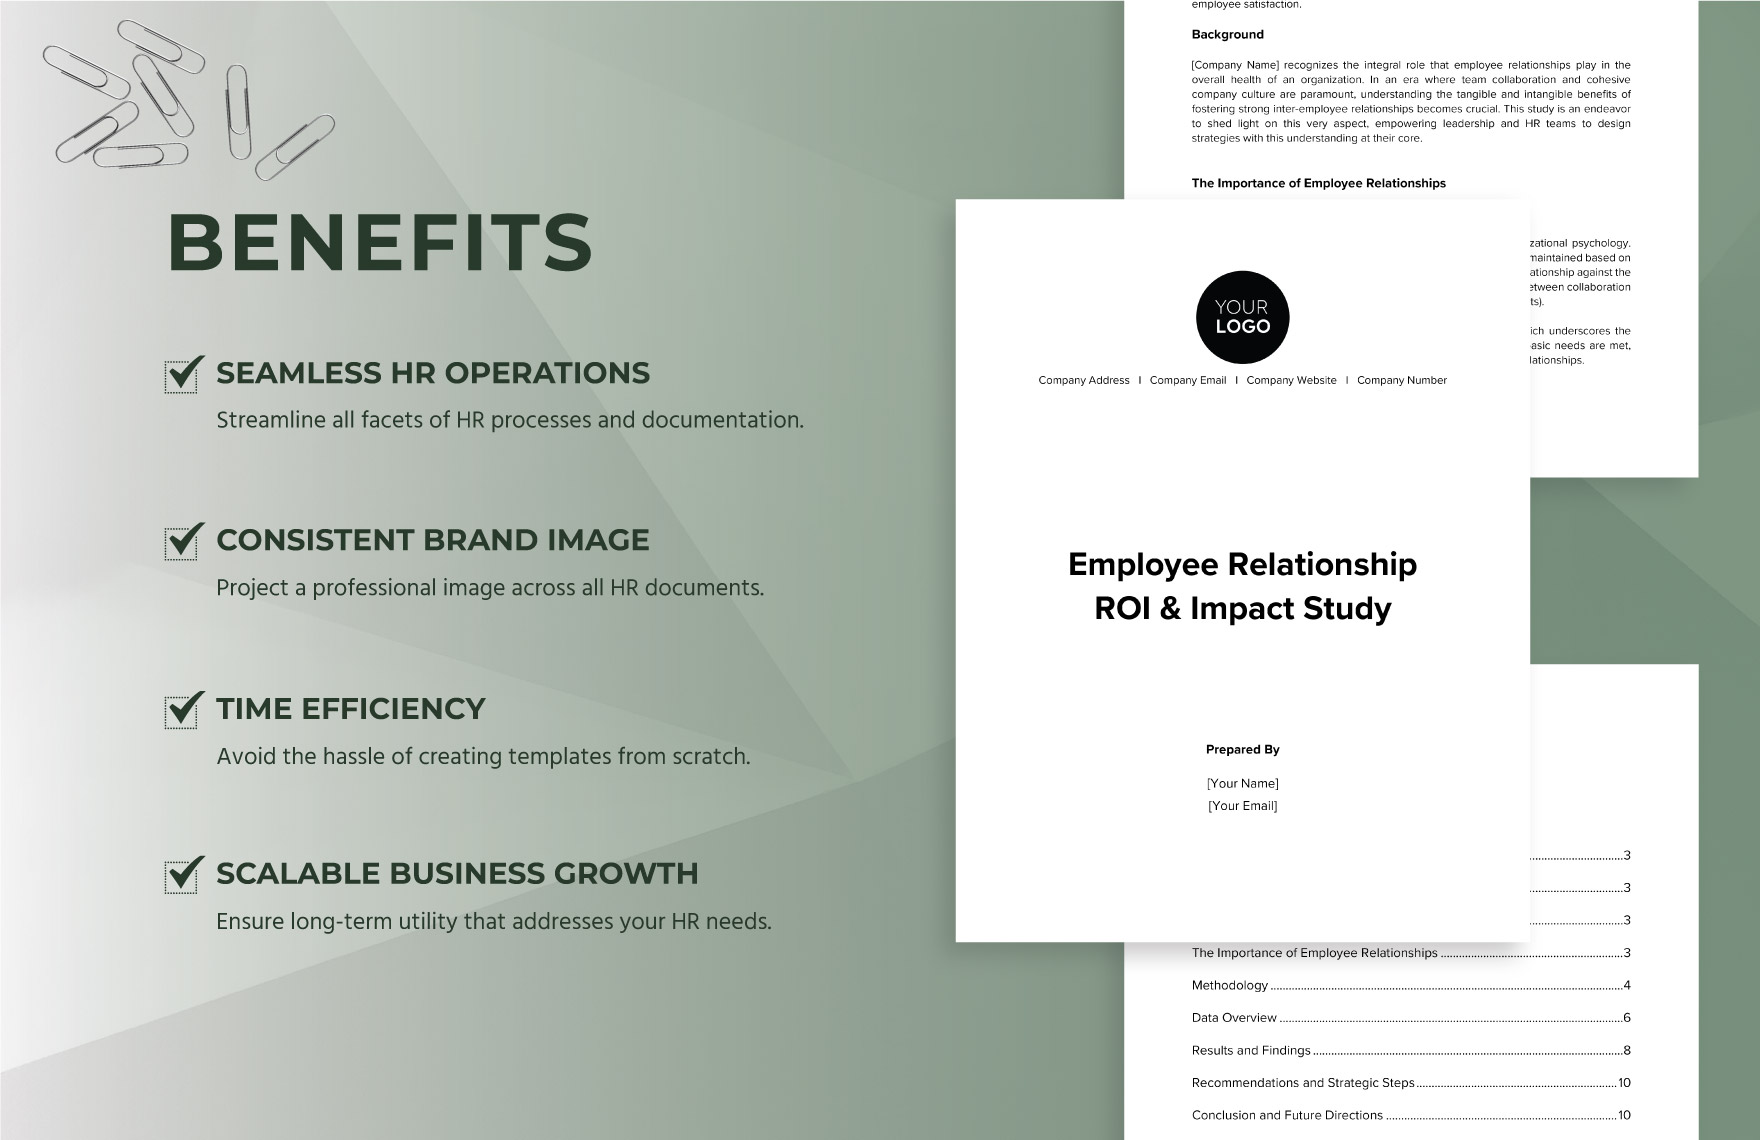 Employee Relationship ROI & Impact Study HR Template